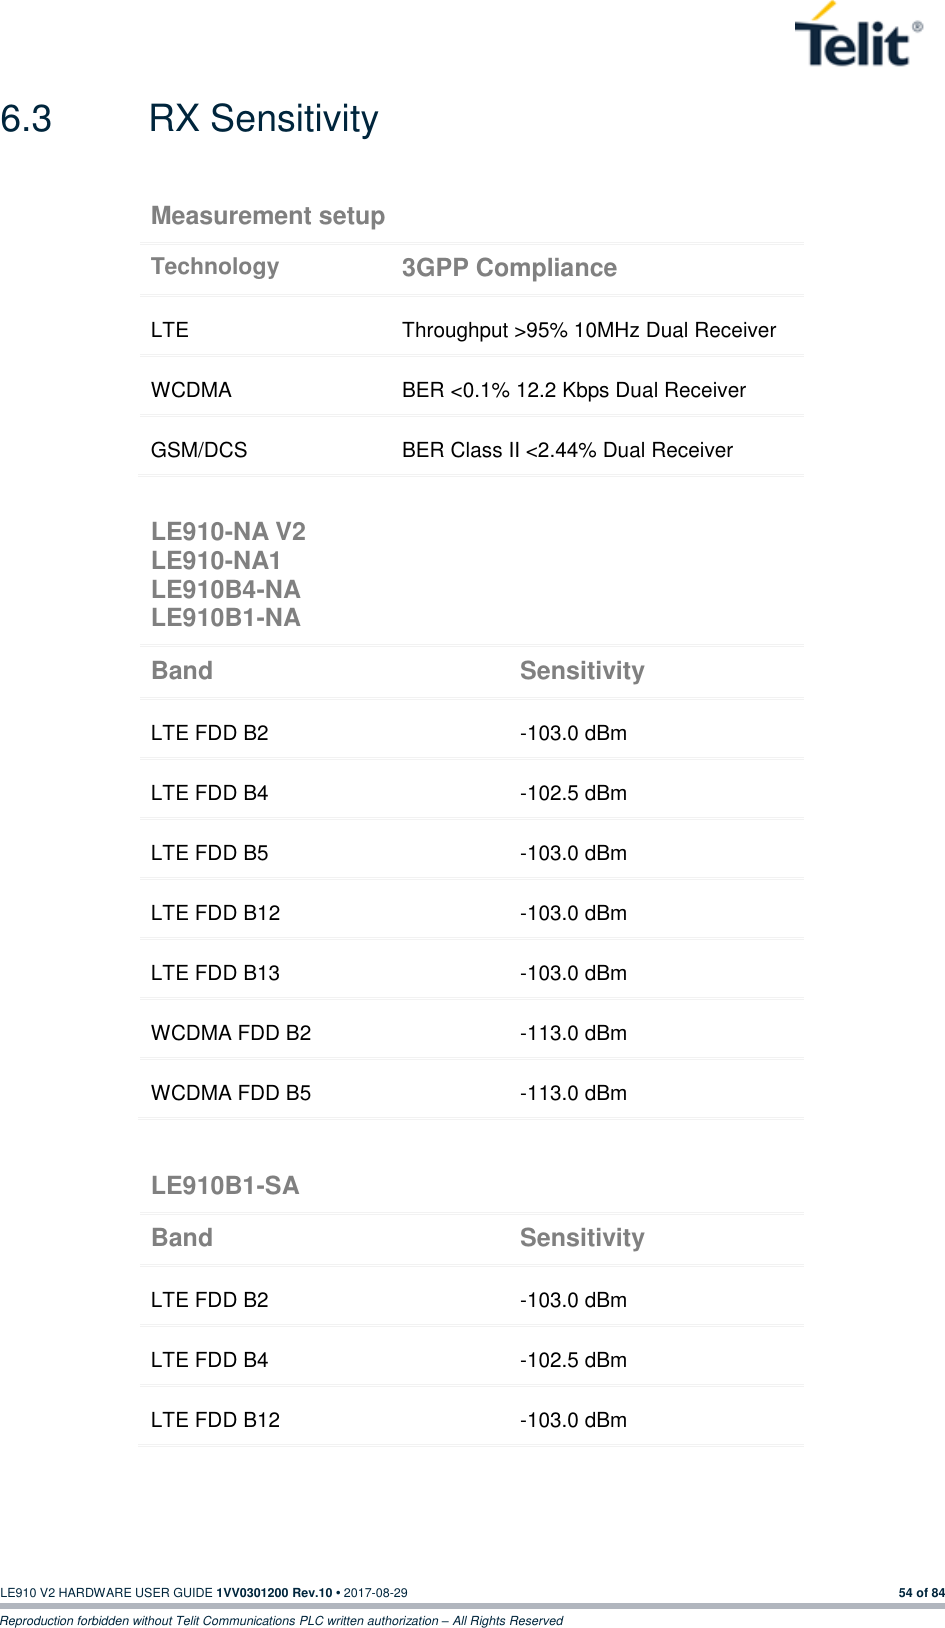   LE910 V2 HARDWARE USER GUIDE 1VV0301200 Rev.10 • 2017-08-29  54 of 84 Reproduction forbidden without Telit Communications PLC written authorization – All Rights Reserved 6.3  RX Sensitivity                               Measurement setup Technology 3GPP Compliance LTE Throughput &gt;95% 10MHz Dual Receiver WCDMA BER &lt;0.1% 12.2 Kbps Dual Receiver GSM/DCS BER Class II &lt;2.44% Dual Receiver LE910-NA V2 LE910-NA1 LE910B4-NA LE910B1-NA Band Sensitivity LTE FDD B2 -103.0 dBm LTE FDD B4 -102.5 dBm LTE FDD B5 -103.0 dBm LTE FDD B12 -103.0 dBm LTE FDD B13 -103.0 dBm WCDMA FDD B2 -113.0 dBm WCDMA FDD B5 -113.0 dBm LE910B1-SA Band Sensitivity LTE FDD B2 -103.0 dBm LTE FDD B4 -102.5 dBm LTE FDD B12 -103.0 dBm 